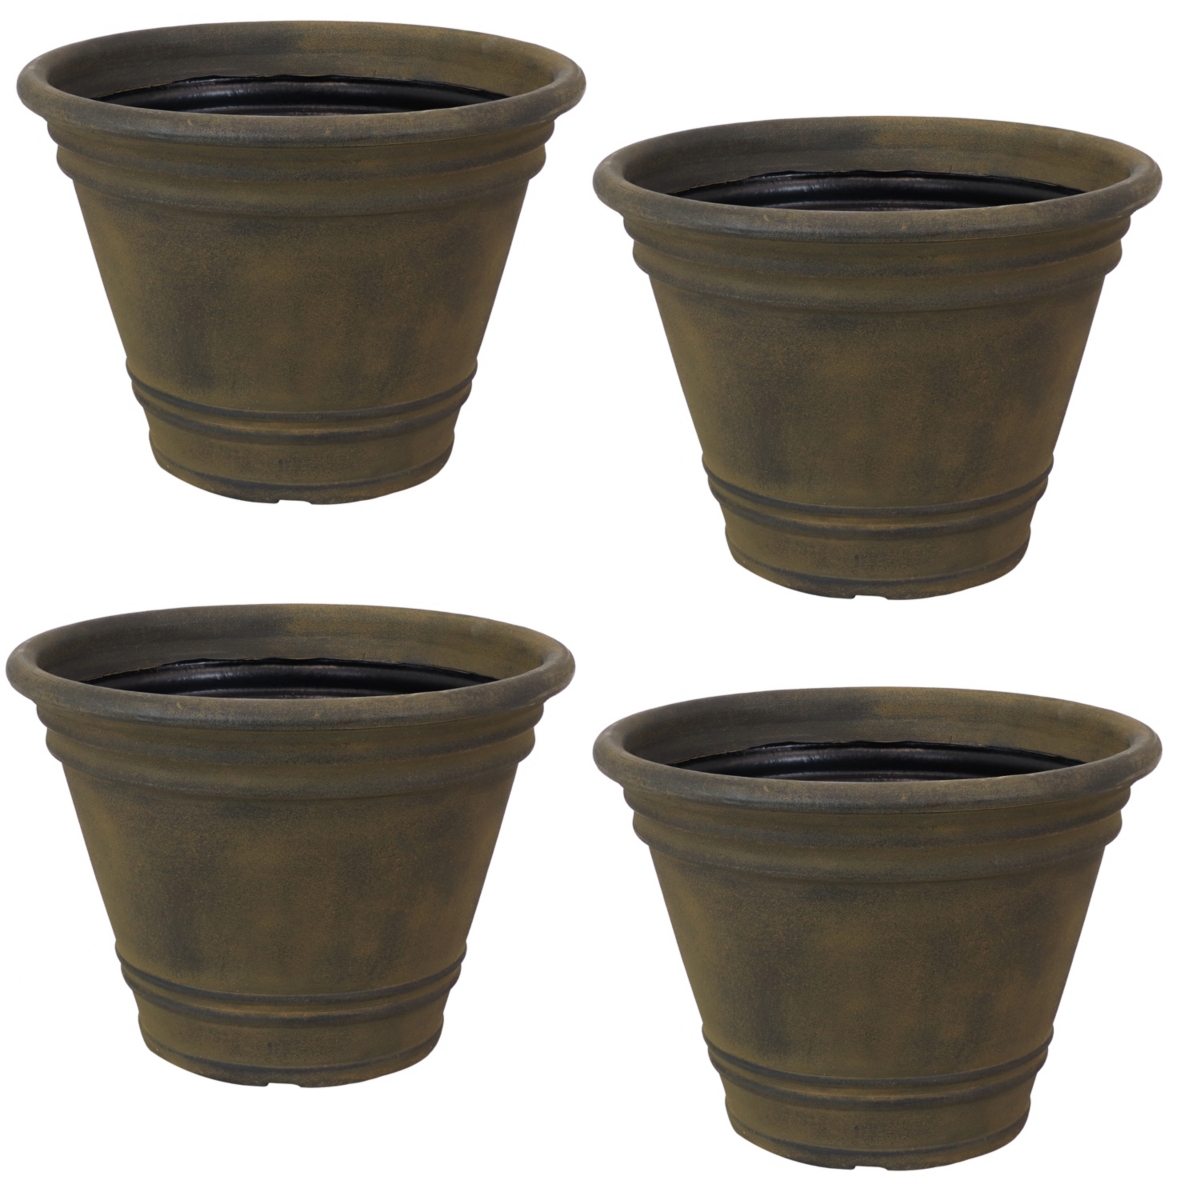 20 in Franklin Unbreakable Polyresin Planter - Sable - Set of 4 - Brown